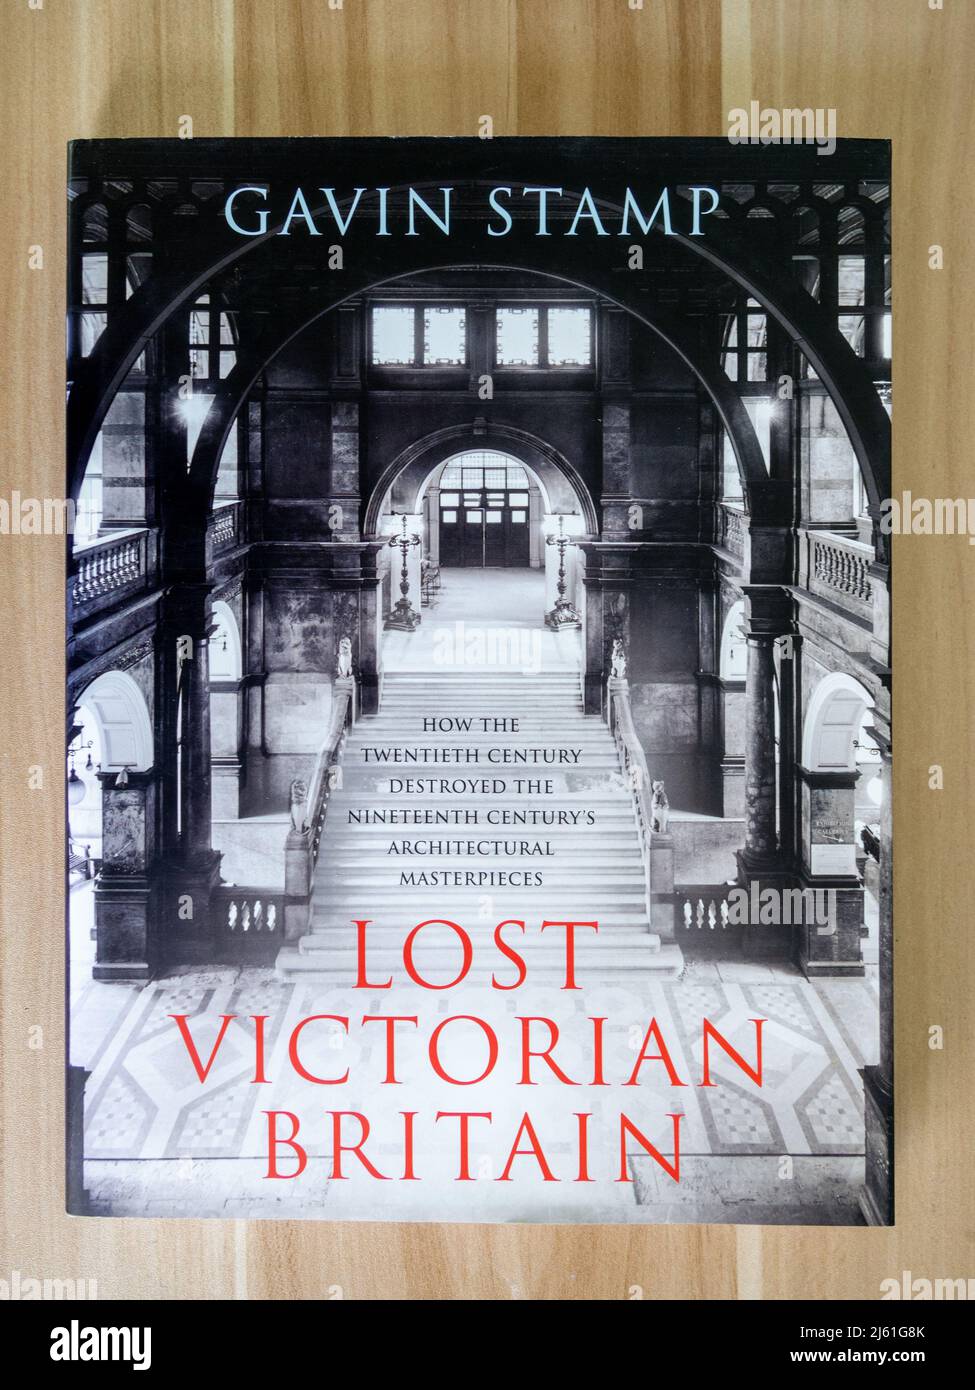 Photo of a book, Lost Victorian Britain, by author Gavin Stamp, 2010 by Aurum Press. Stock Photo